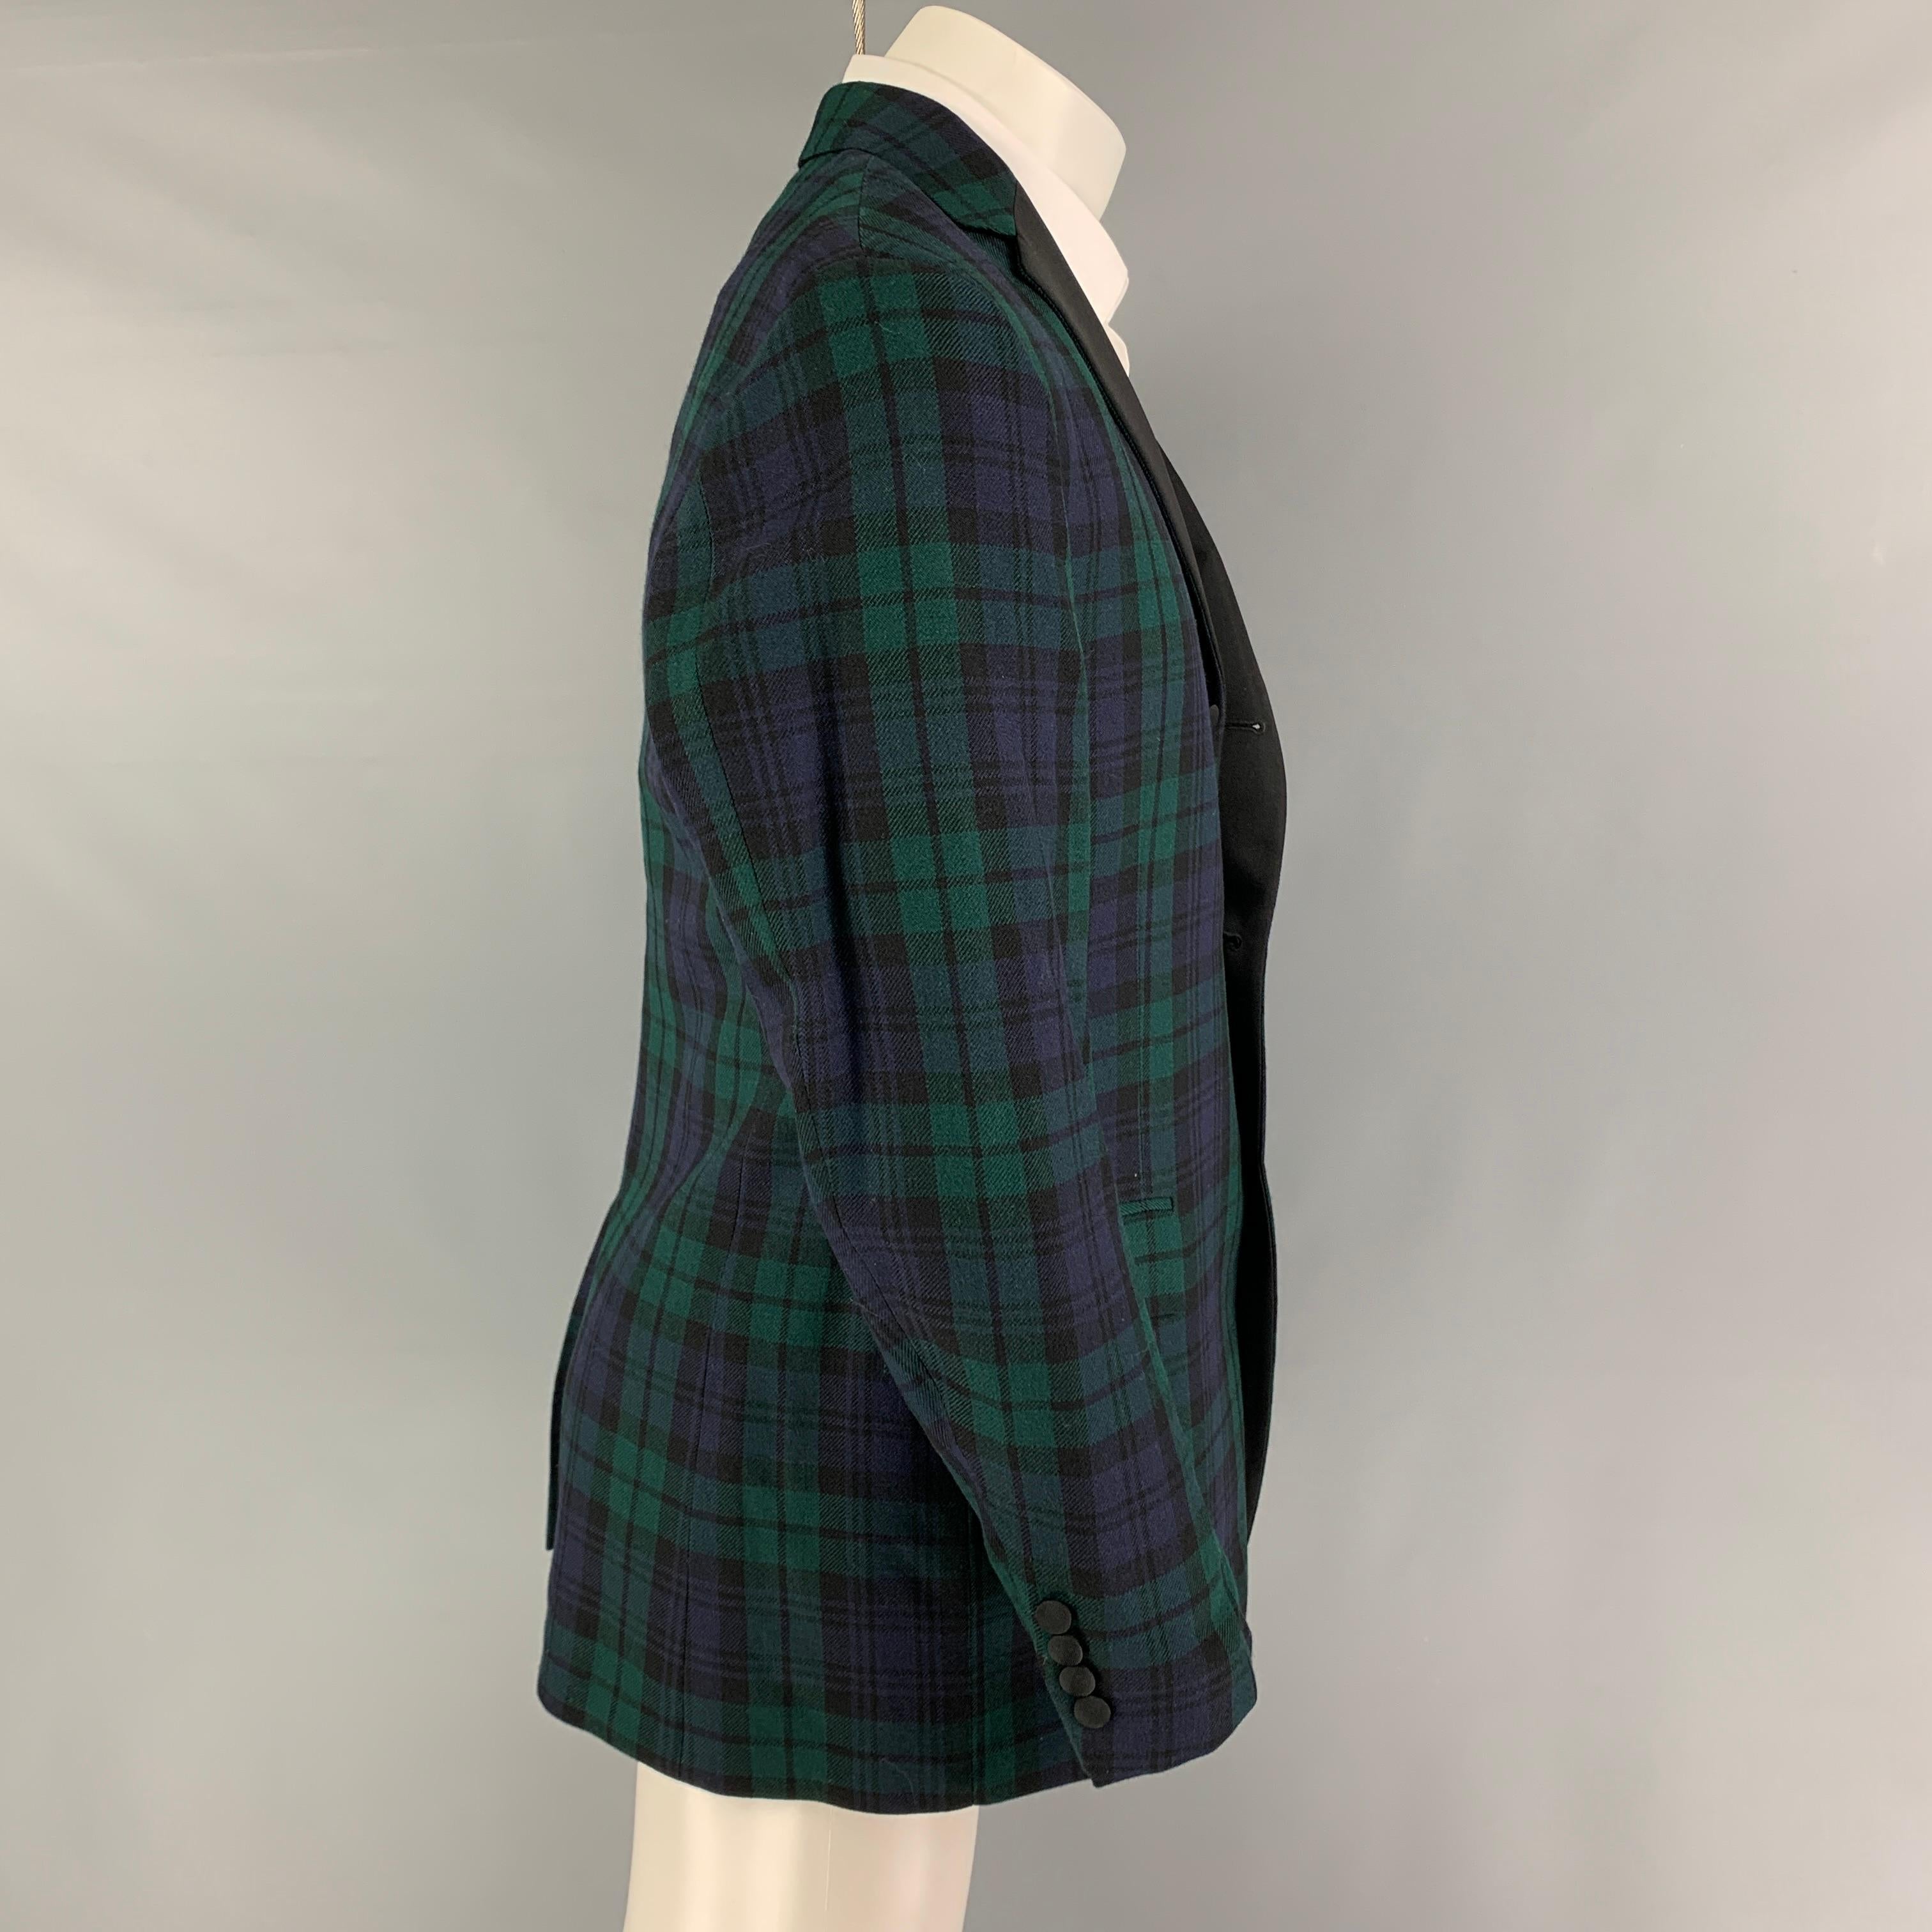 POLO by RALPH LAUREN sport coat comes in a blackwatch plaid wool with a full liner featuring a notch lapel, flap pockets, single back vent, and a three button closure. Made in Italy.

Very Good Pre-Owned Condition.
Marked: